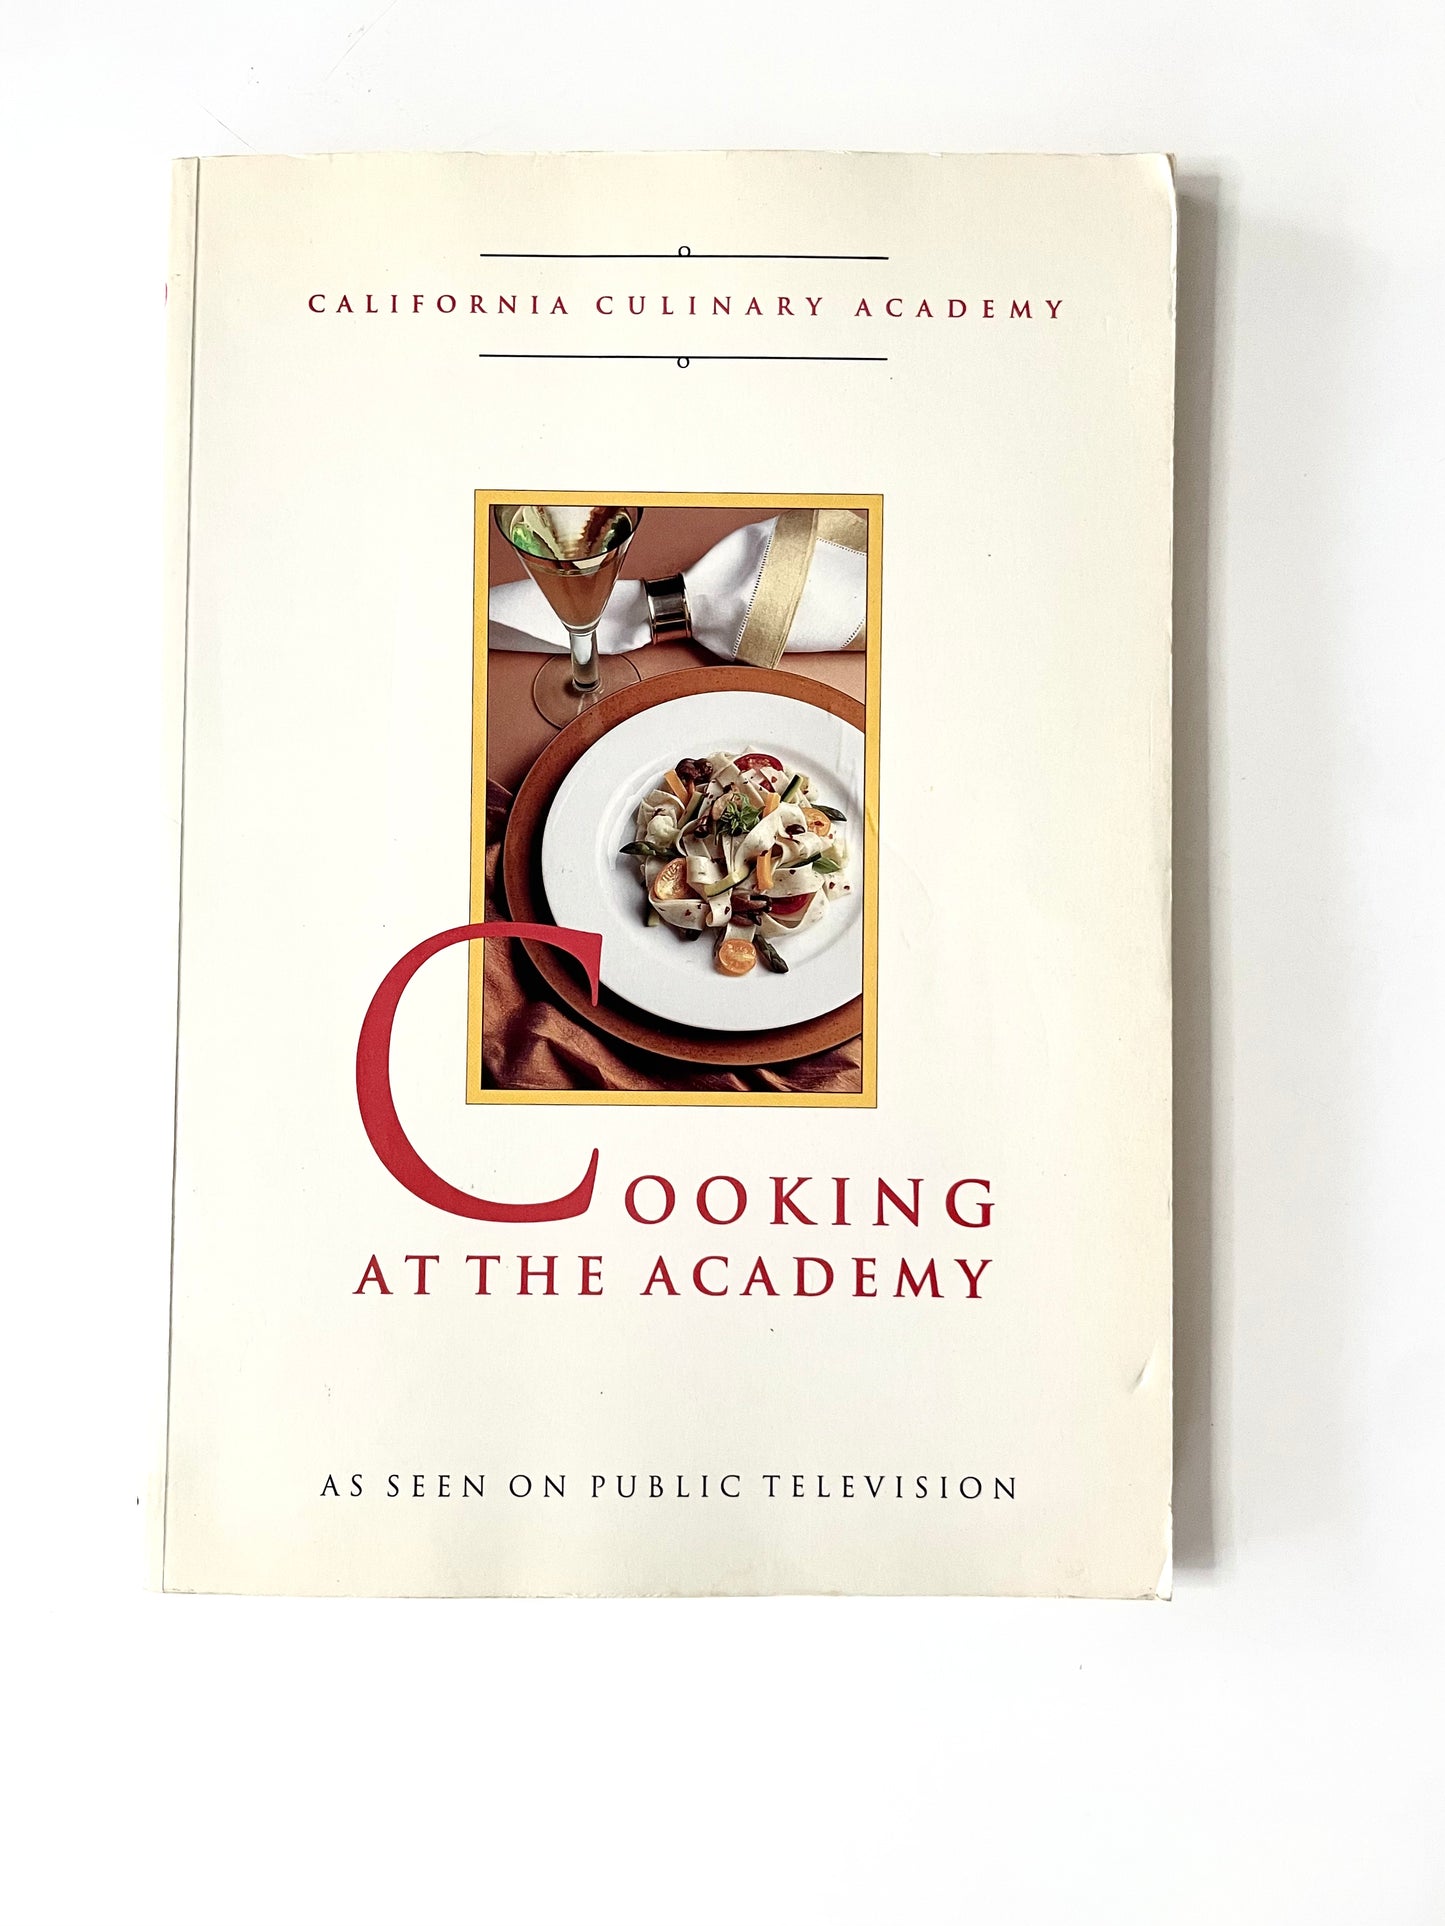 Cooking at the Academy bu California Culinary Academy